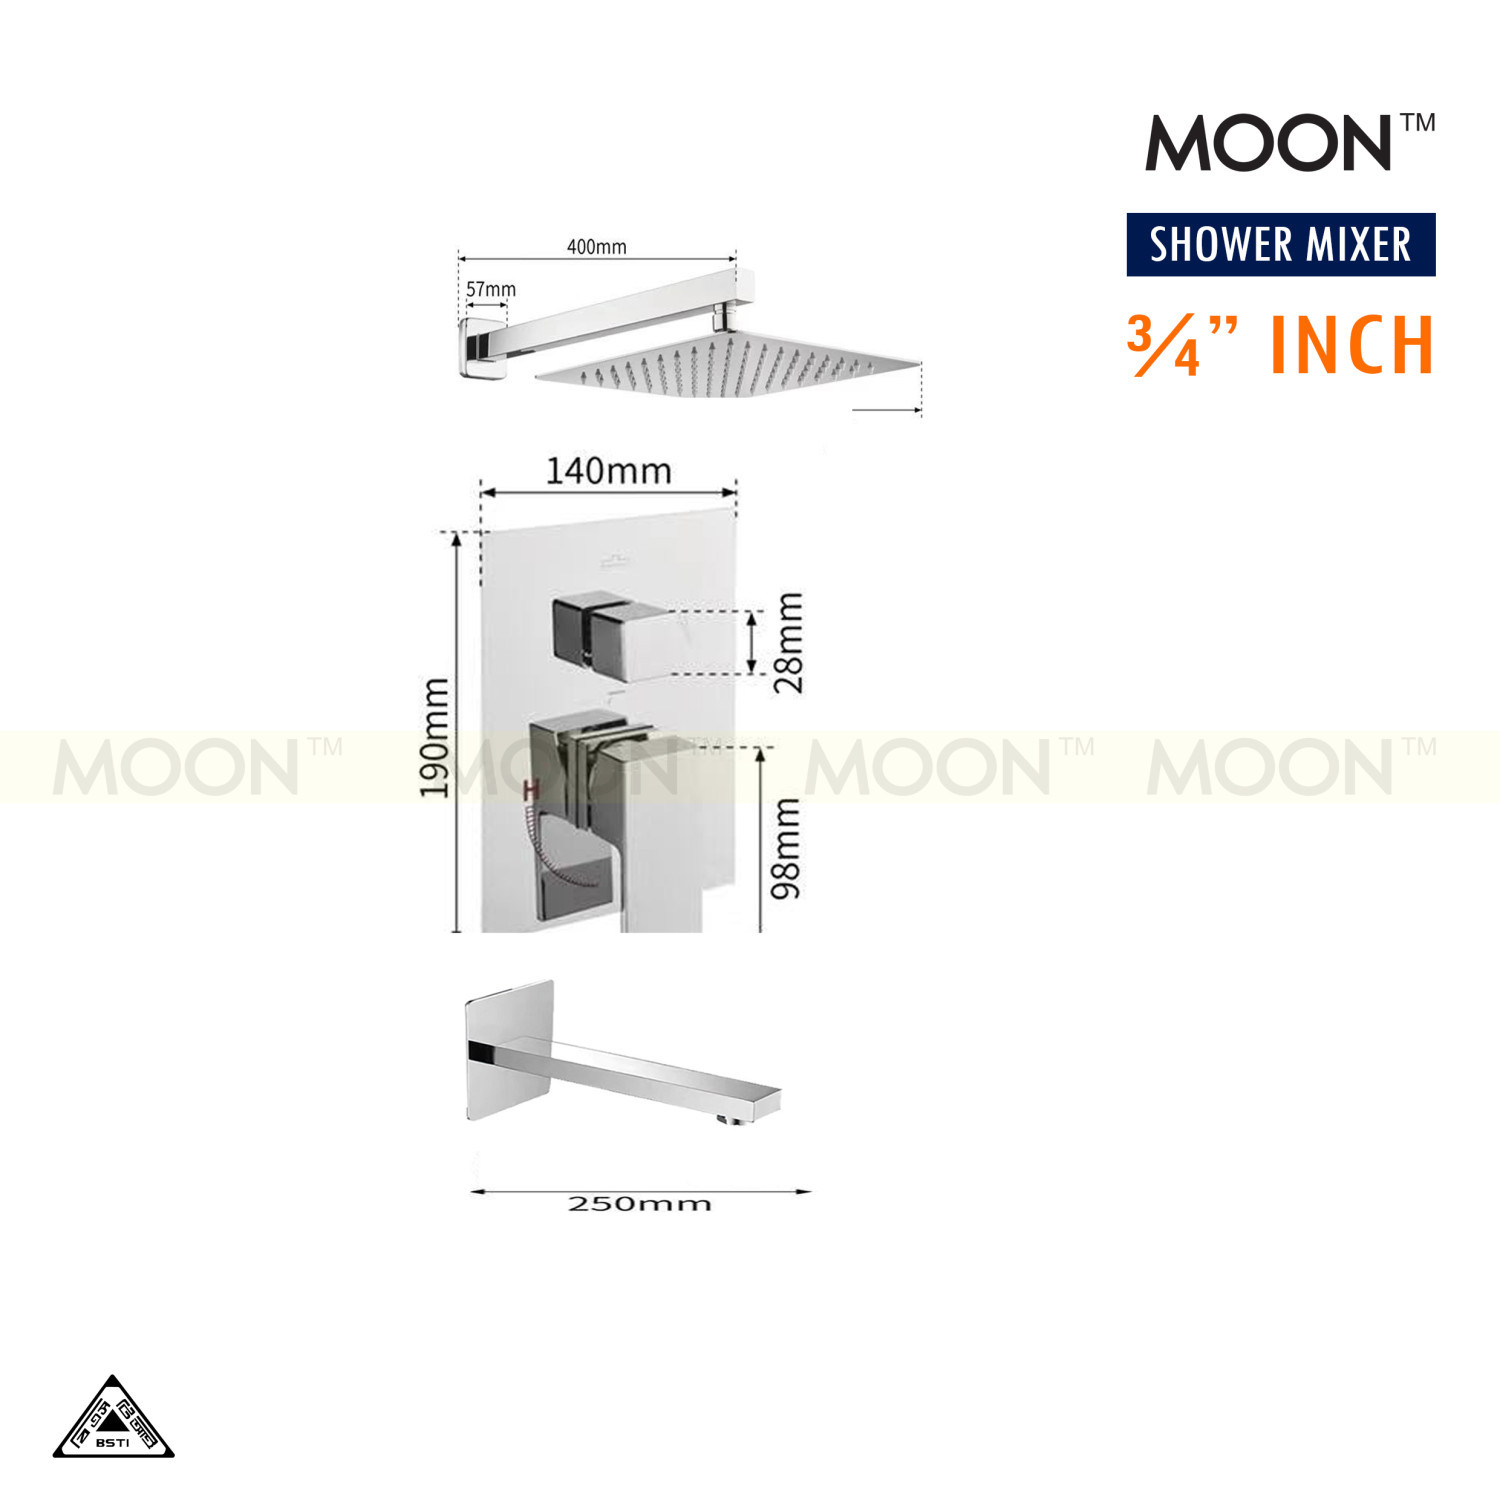 ¾” SHOWER MIXER WITH SPOUT MOON